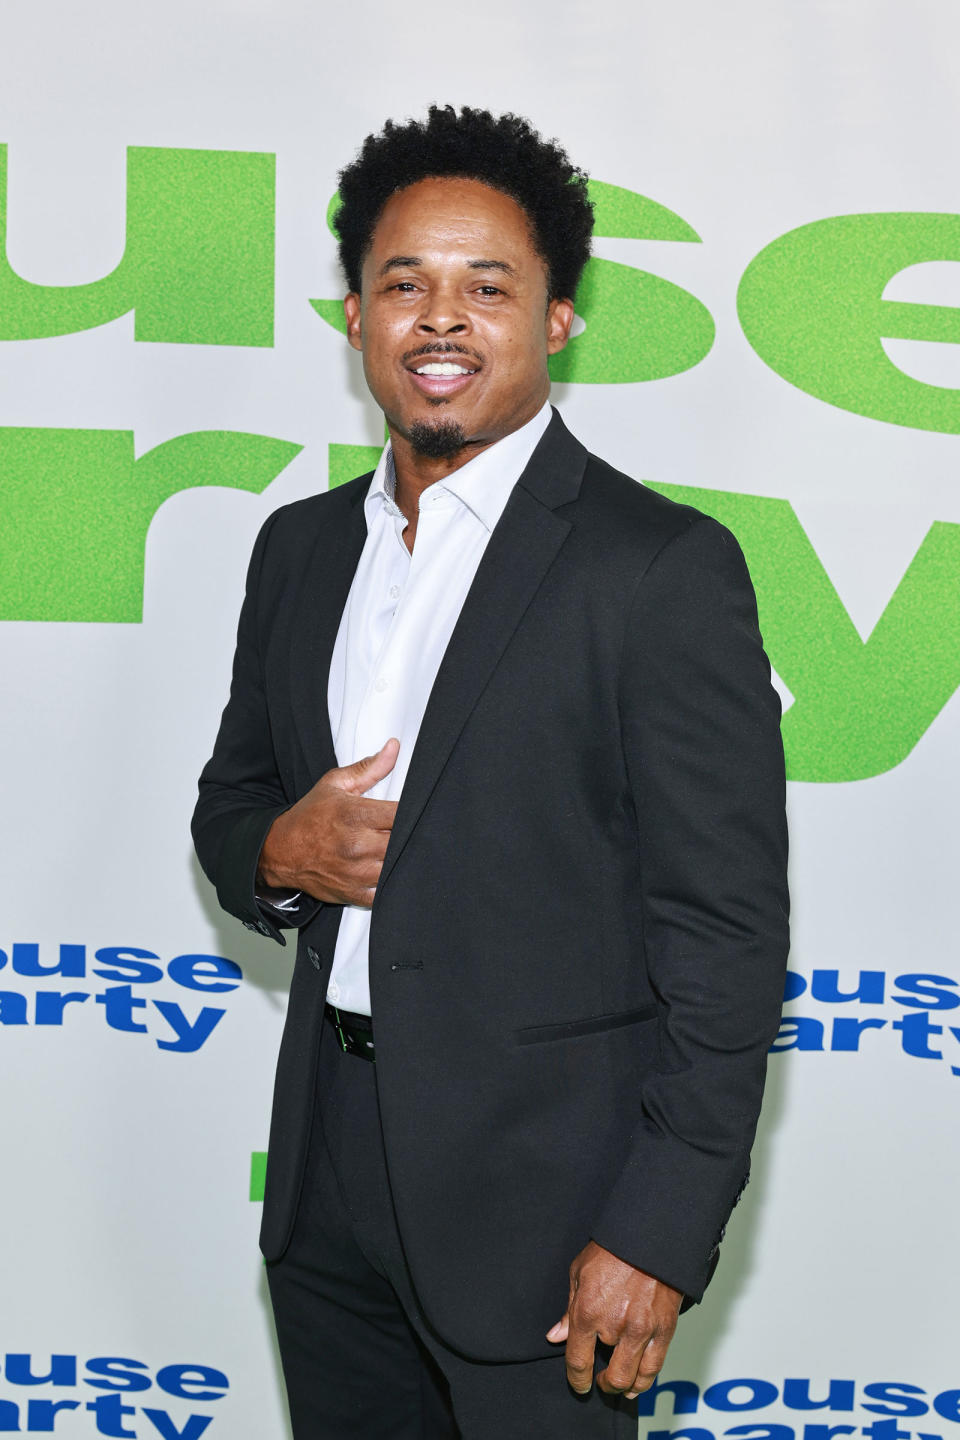 HOLLYWOOD, CALIFORNIA - JANUARY 11: Walter Emanuel Jones attends the Special Red Carpet Screening for New Line Cinema's "House Party" at TCL Chinese 6 Theatres on January 11, 2023 in Hollywood, California. (Photo by Matt Winkelmeyer/Getty Images)<span class="copyright">Getty Images—2023 Getty Images</span>